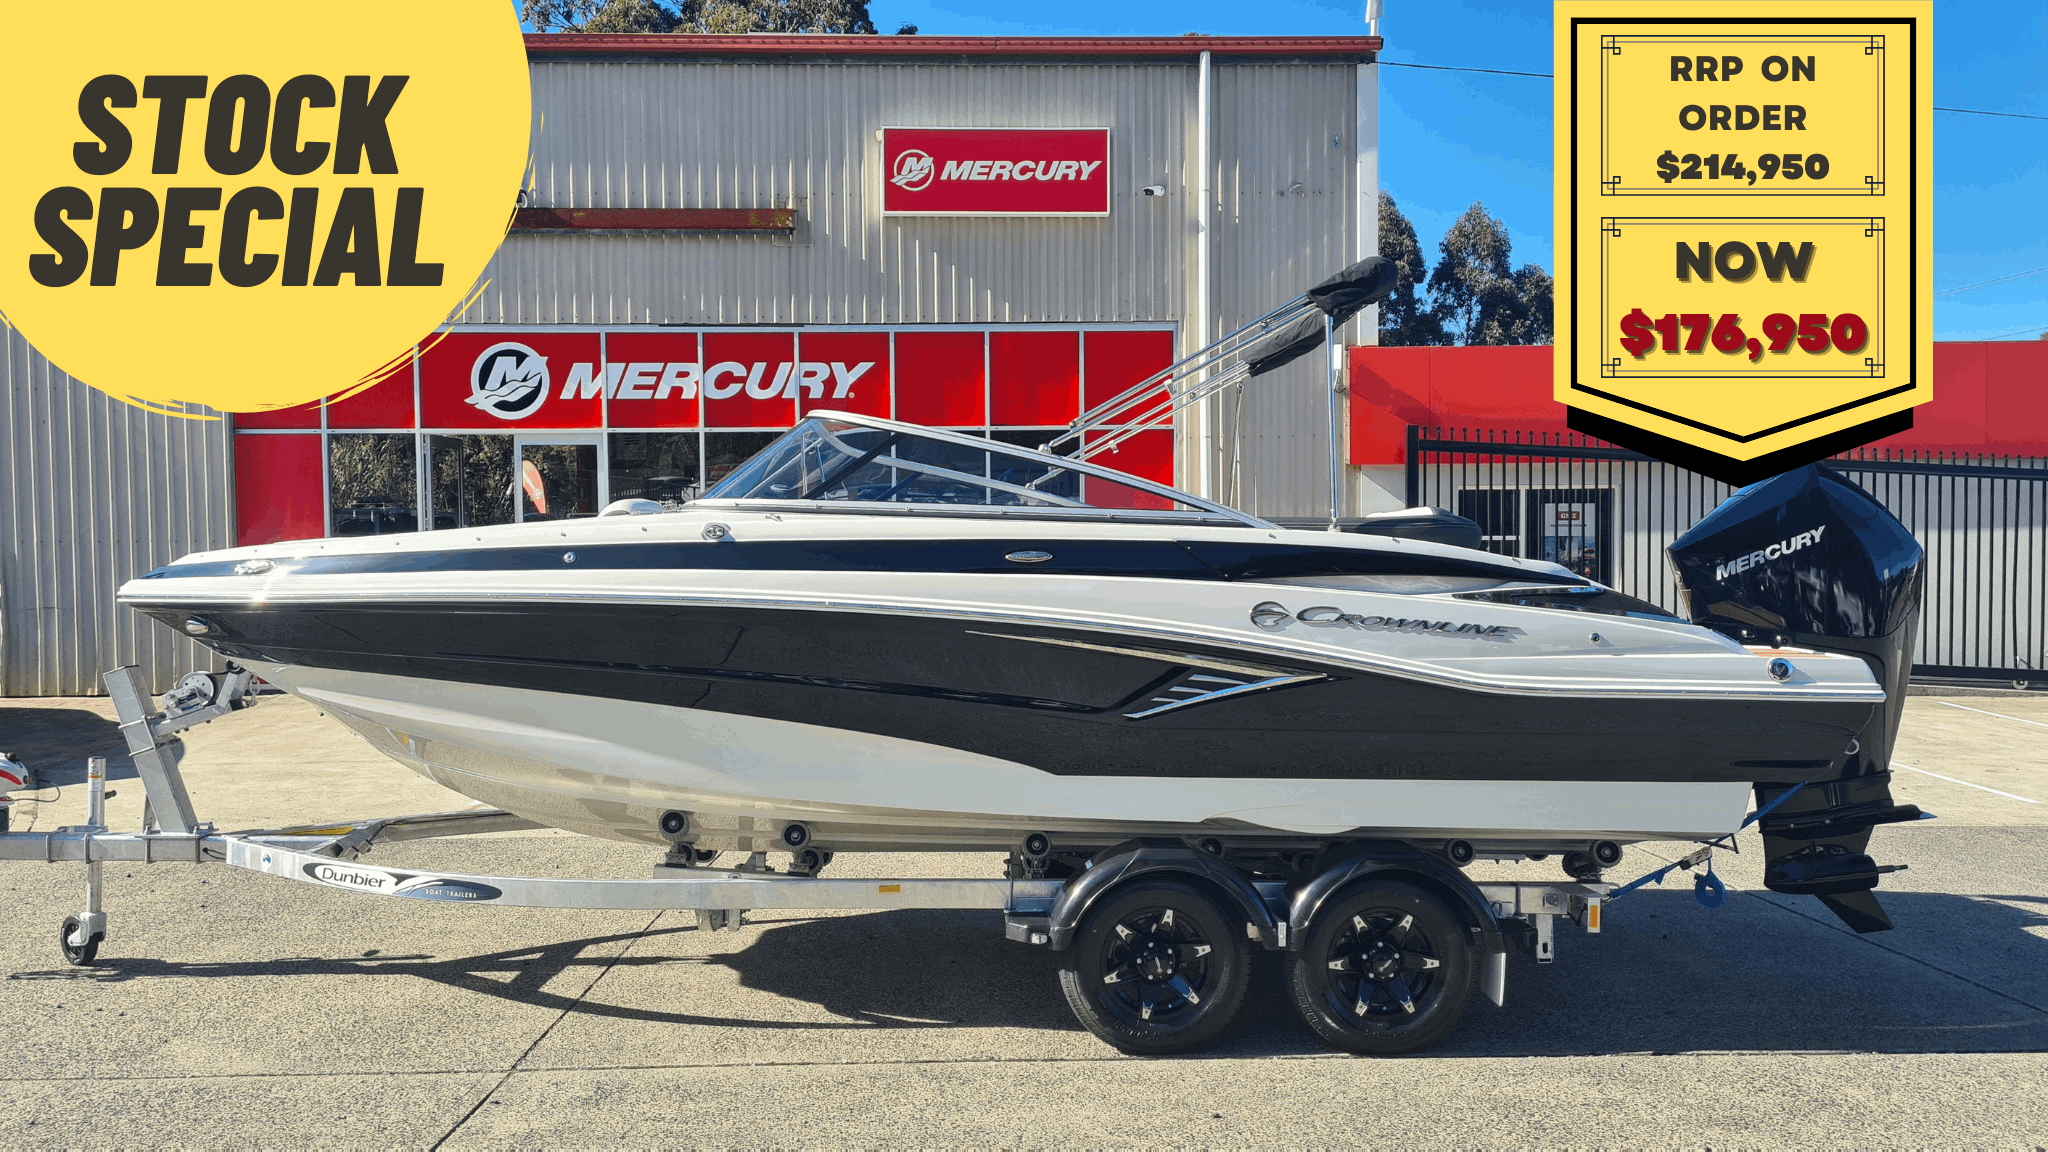 CROWNLINE E215 XS 2022 AT A SPECIAL STOCK PRICE NOW AT ONLY $176,950!